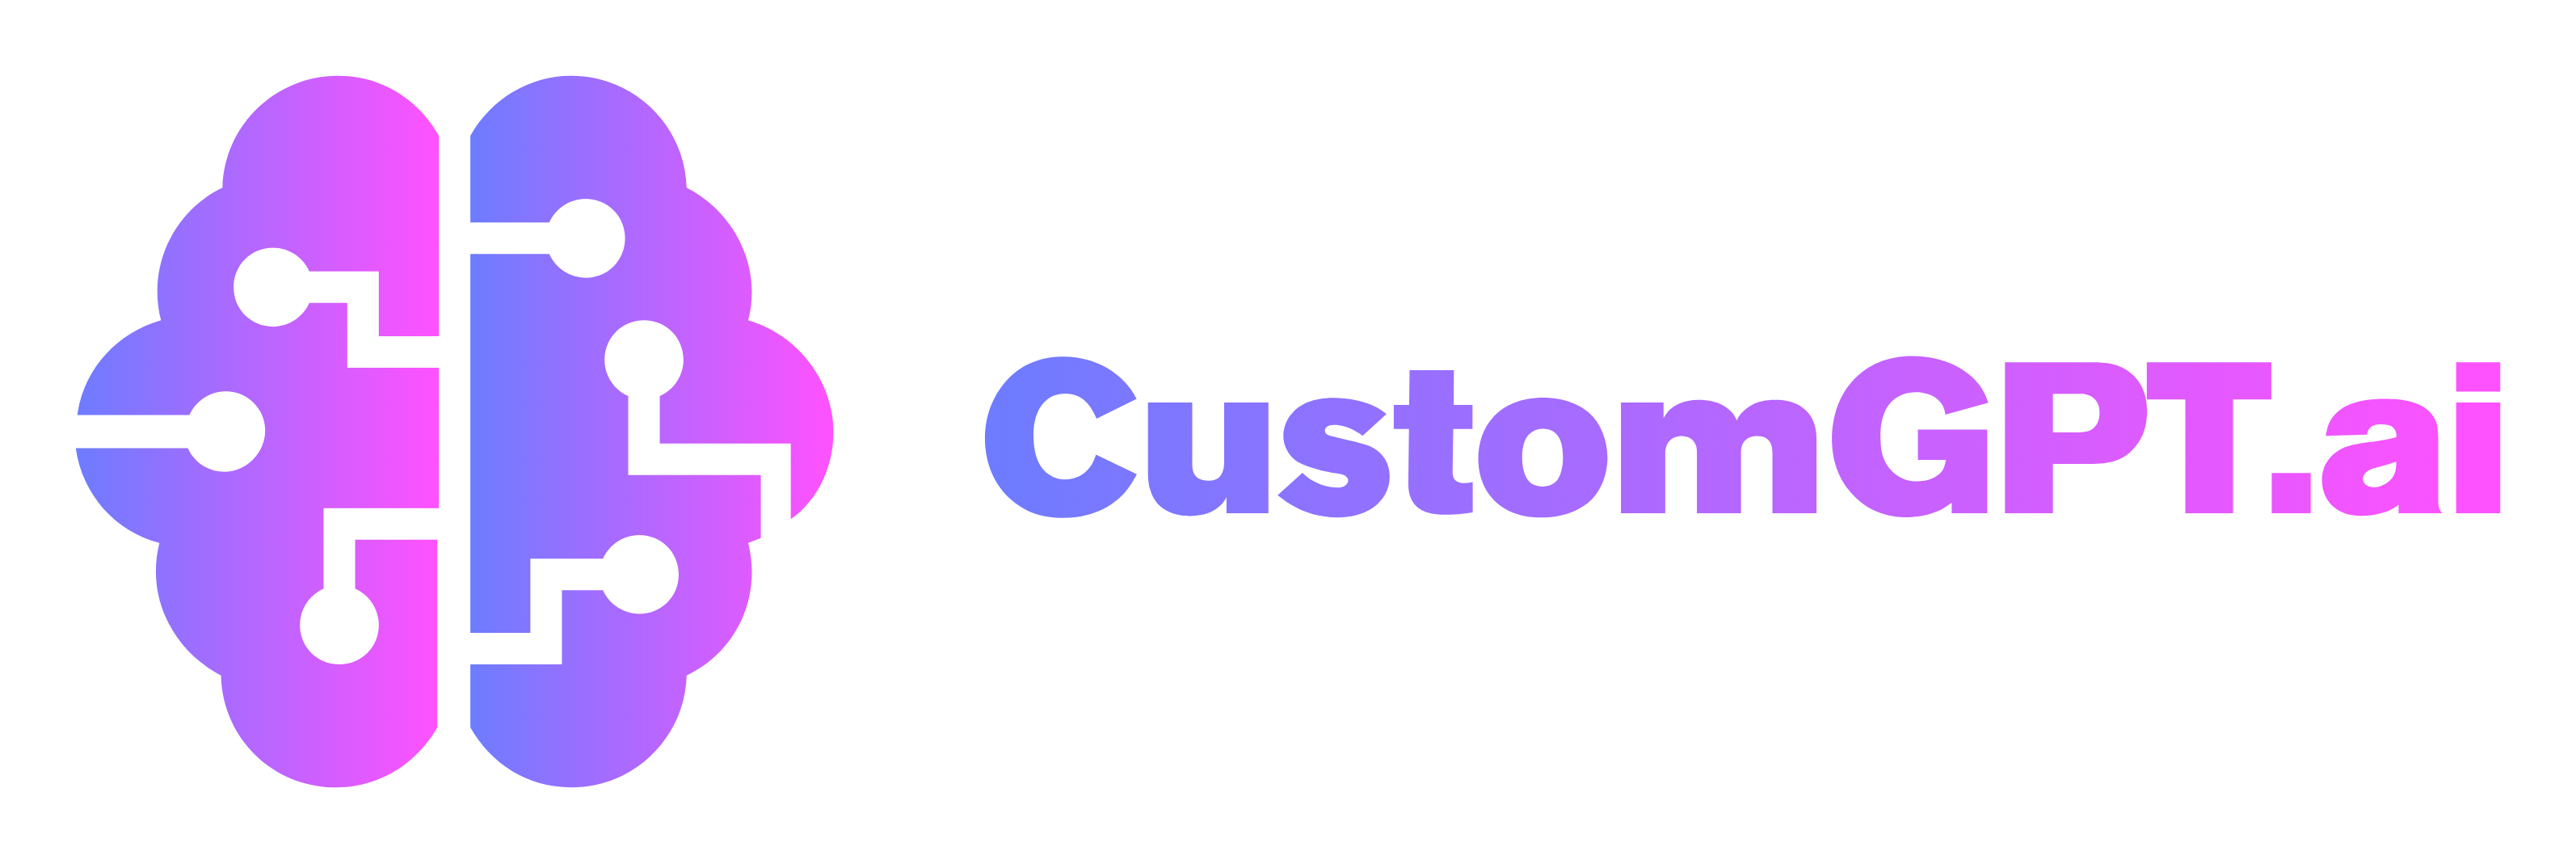 CustomGPT A leader in generative AI business solutions